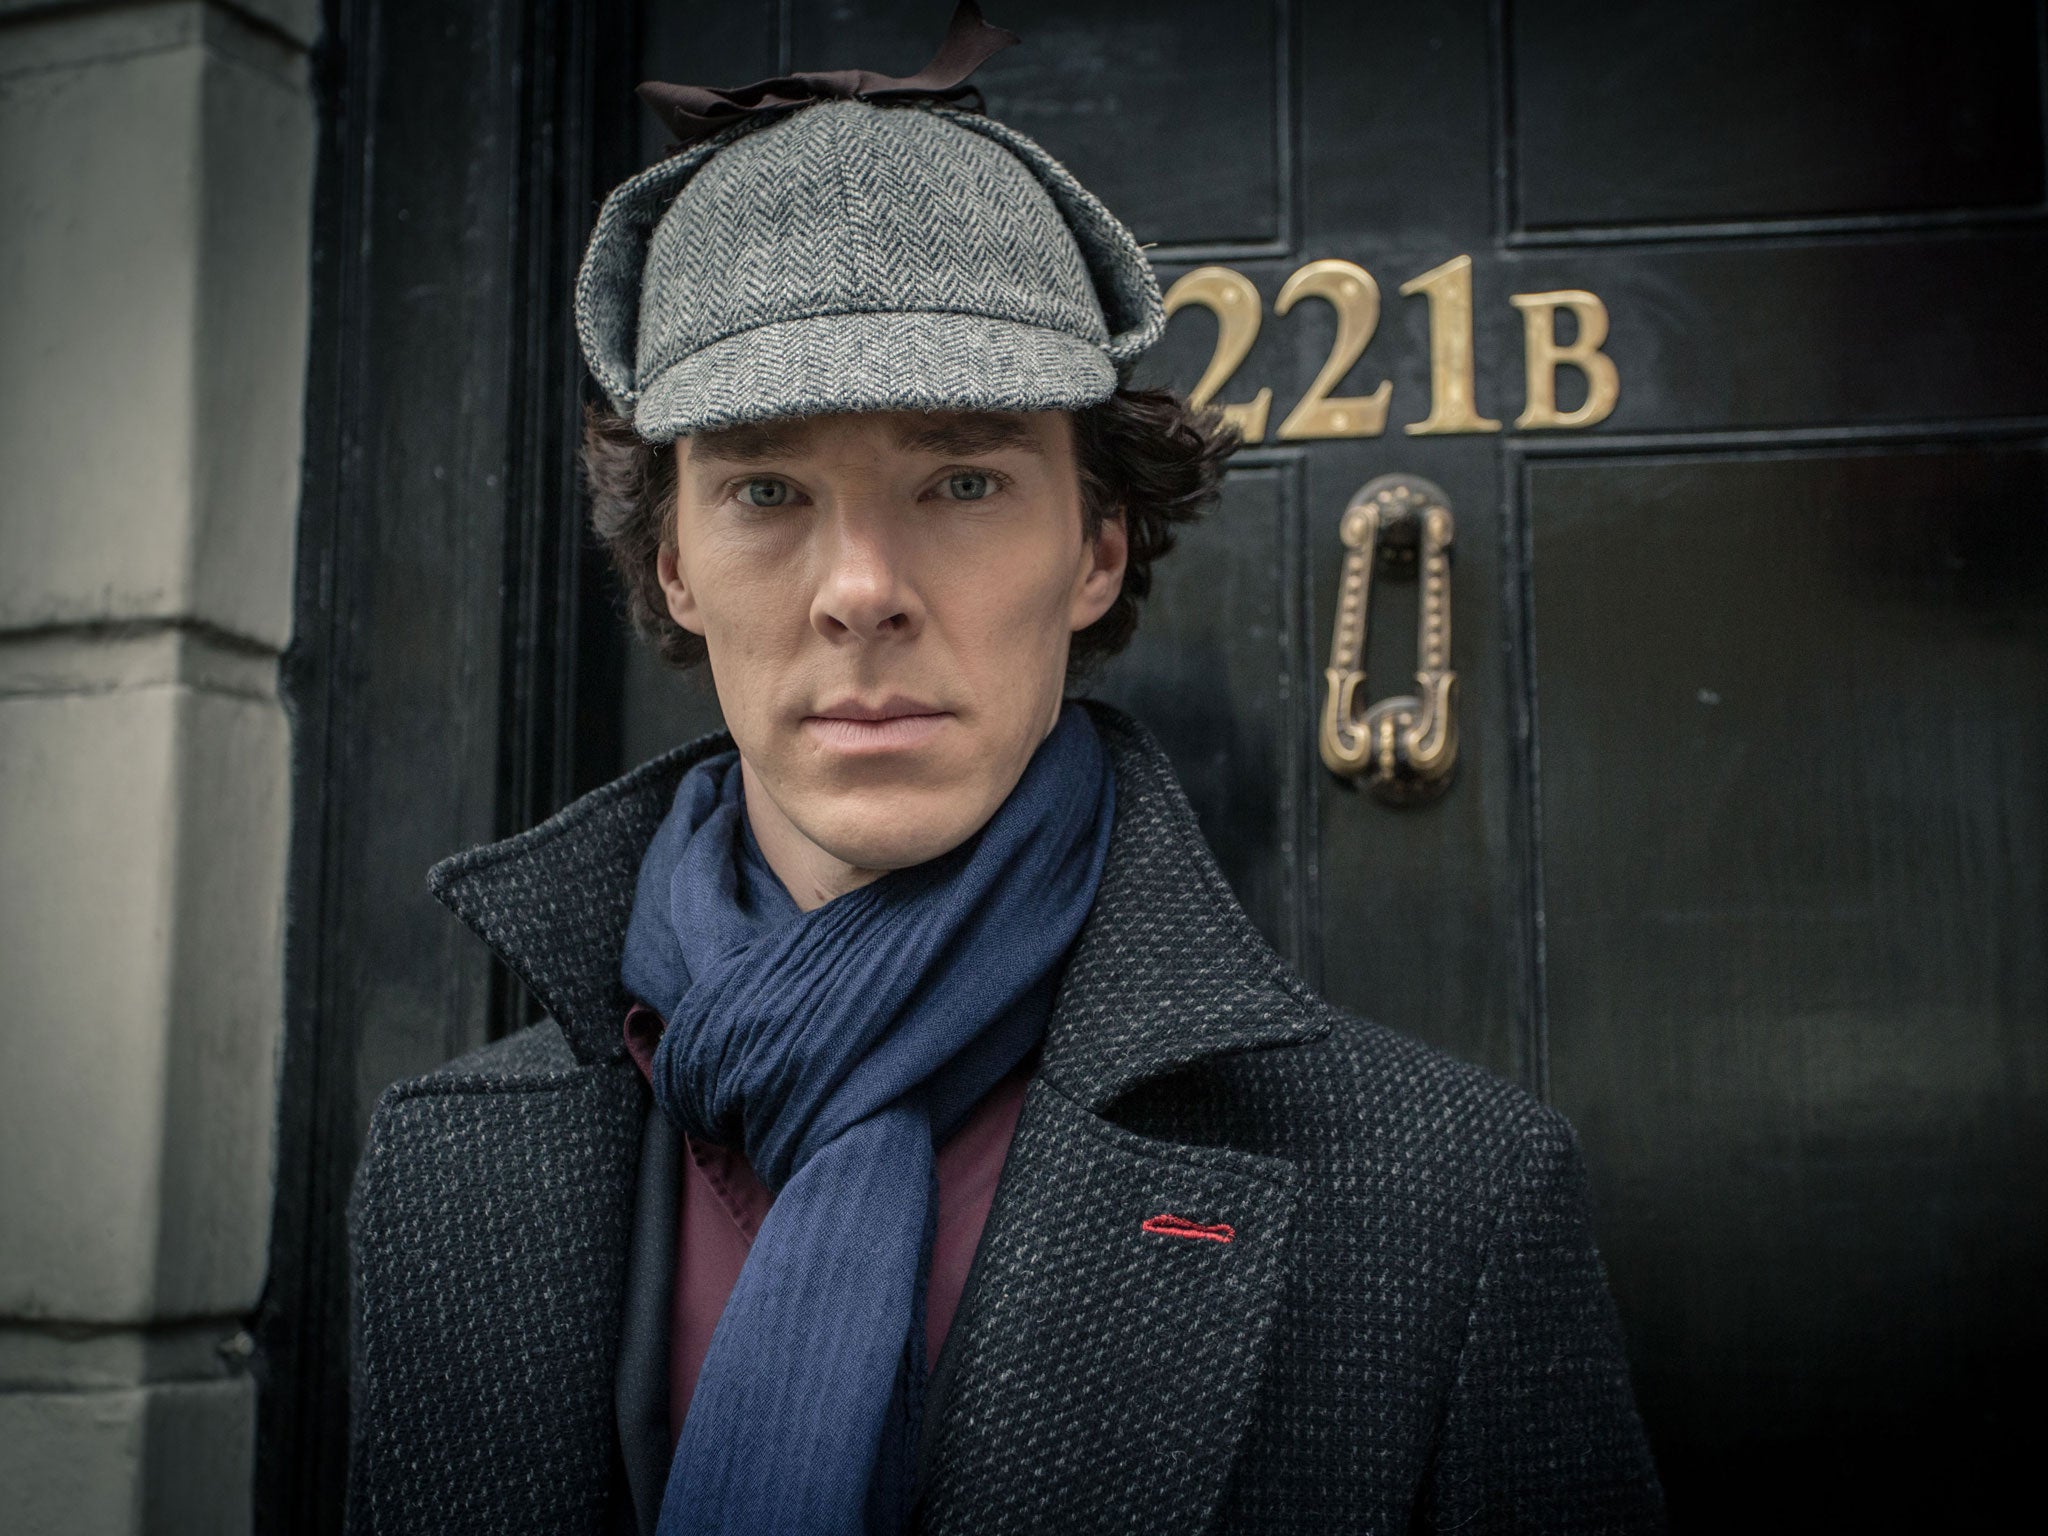 Sherlock Holmes portrayed by Benedict Cumberbatch in the BBC series